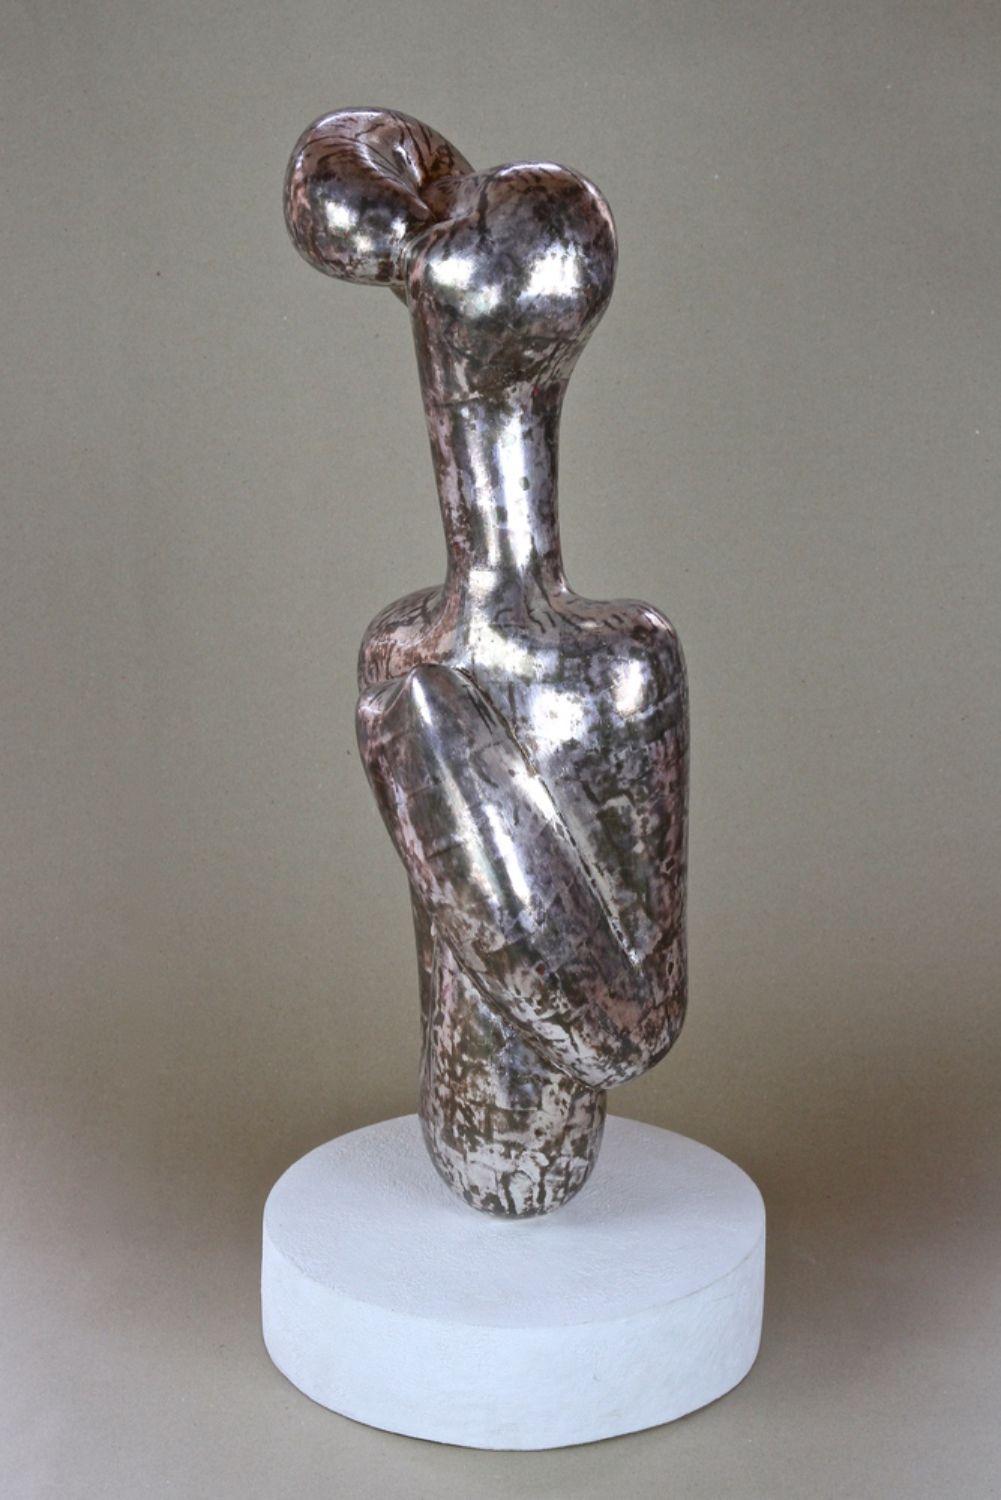 Abstract Contemporary Silvered Sculpture by M. Treml, Handcarved, Austria 2018 For Sale 5